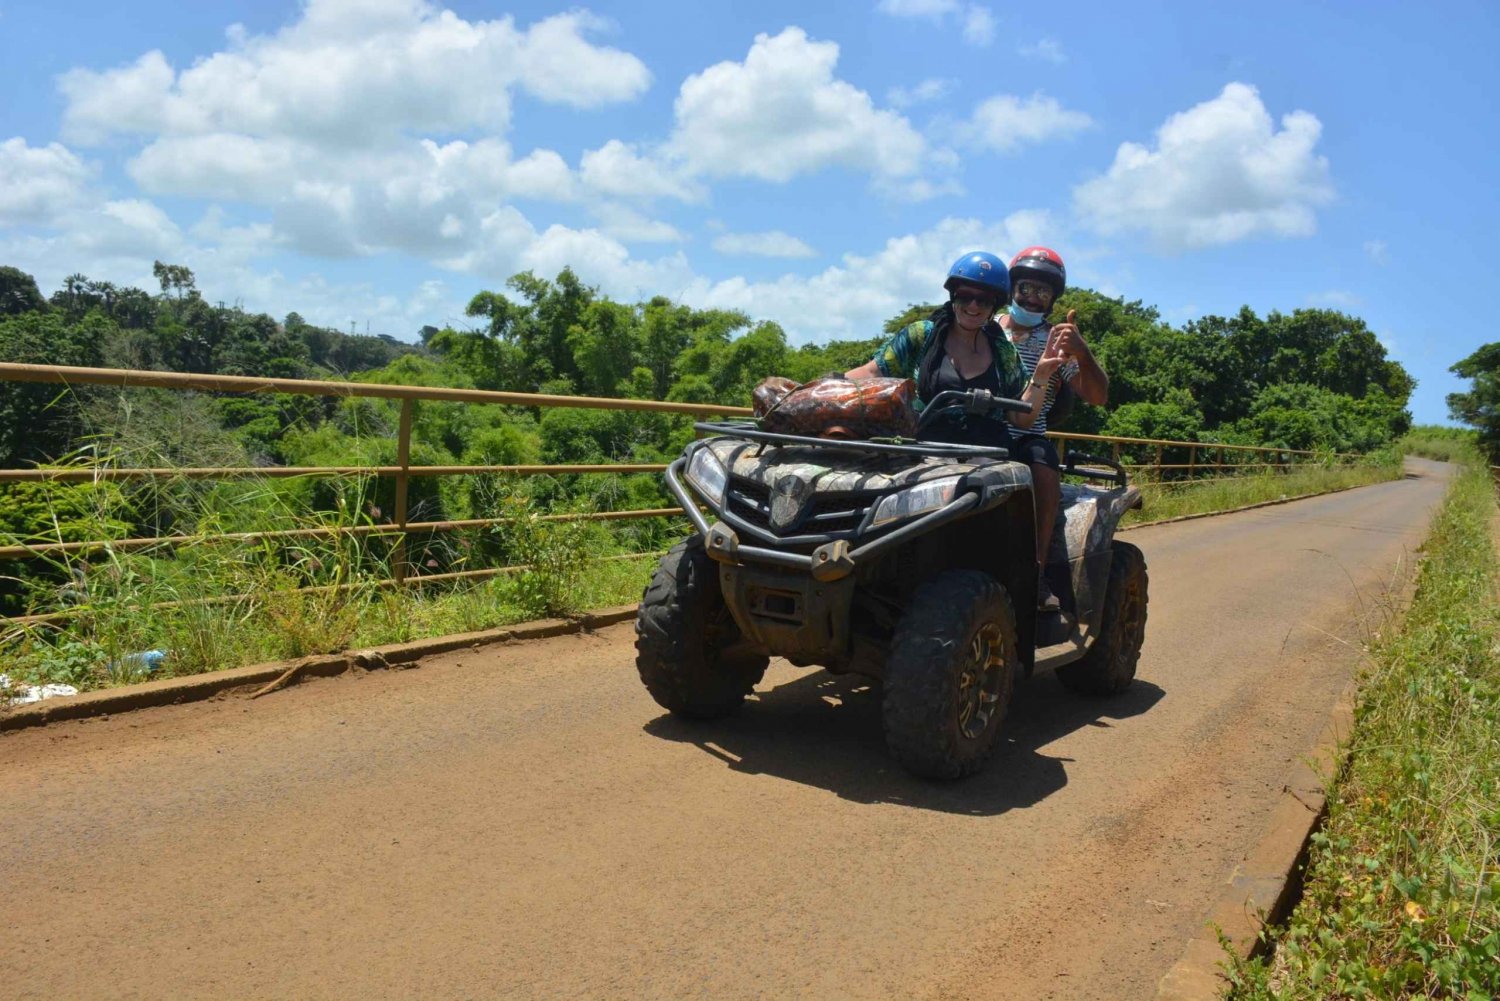 Mauritius: Full-Day Quad Bike Tour with Lunch